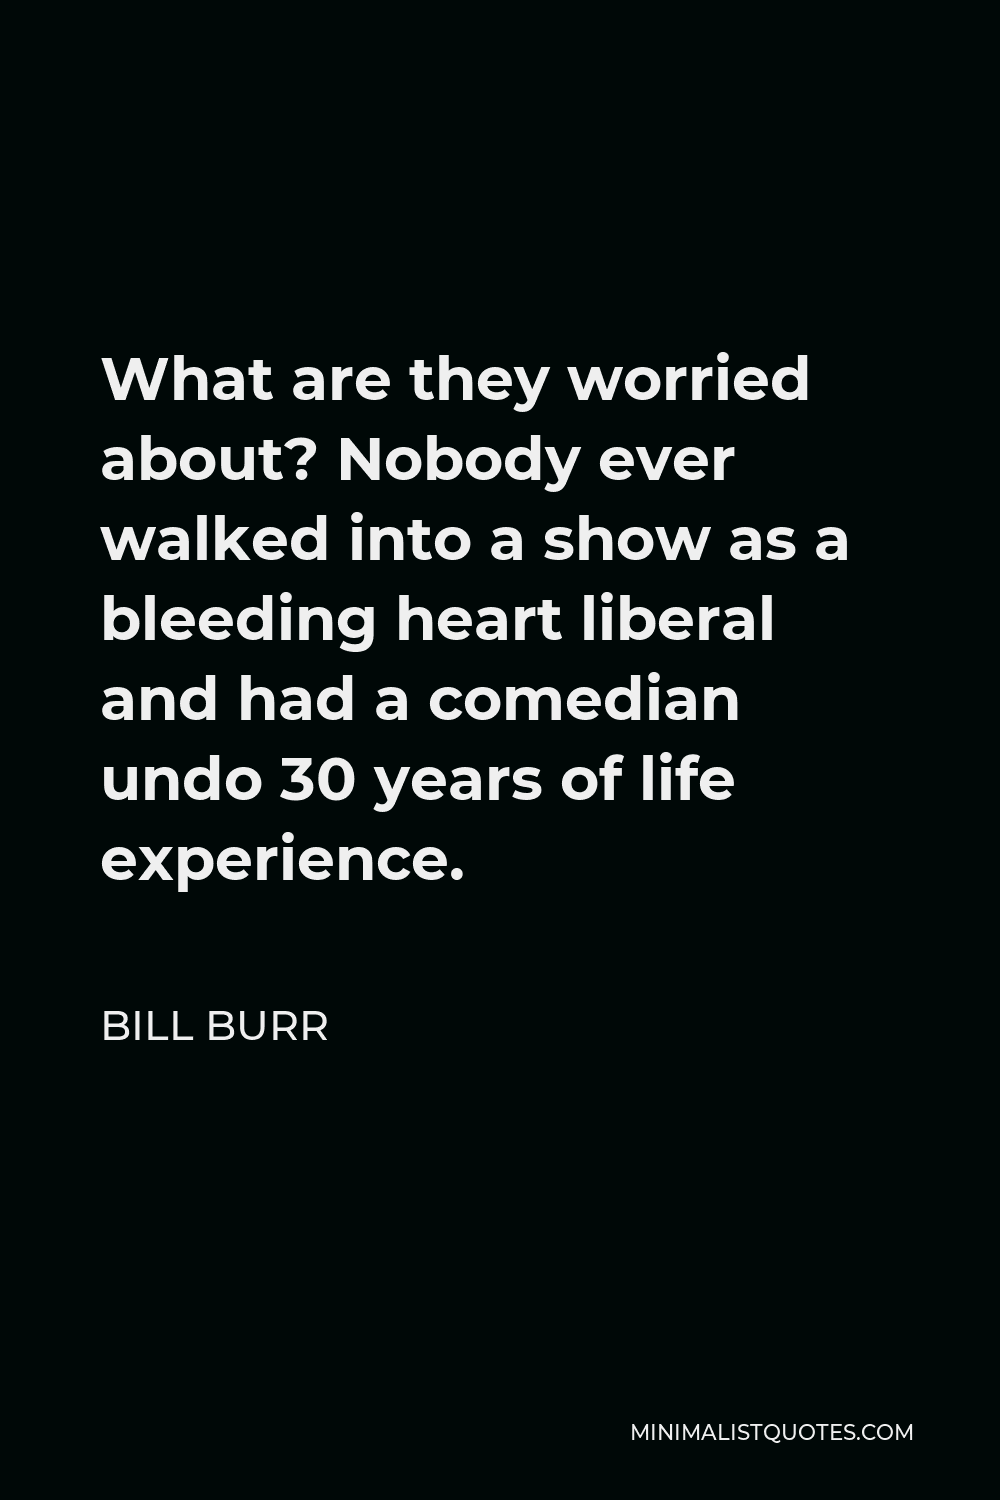 Bill Burr Quote - What are they worried about? Nobody ever walked into a show as a bleeding heart liberal and had a comedian undo 30 years of life experience.